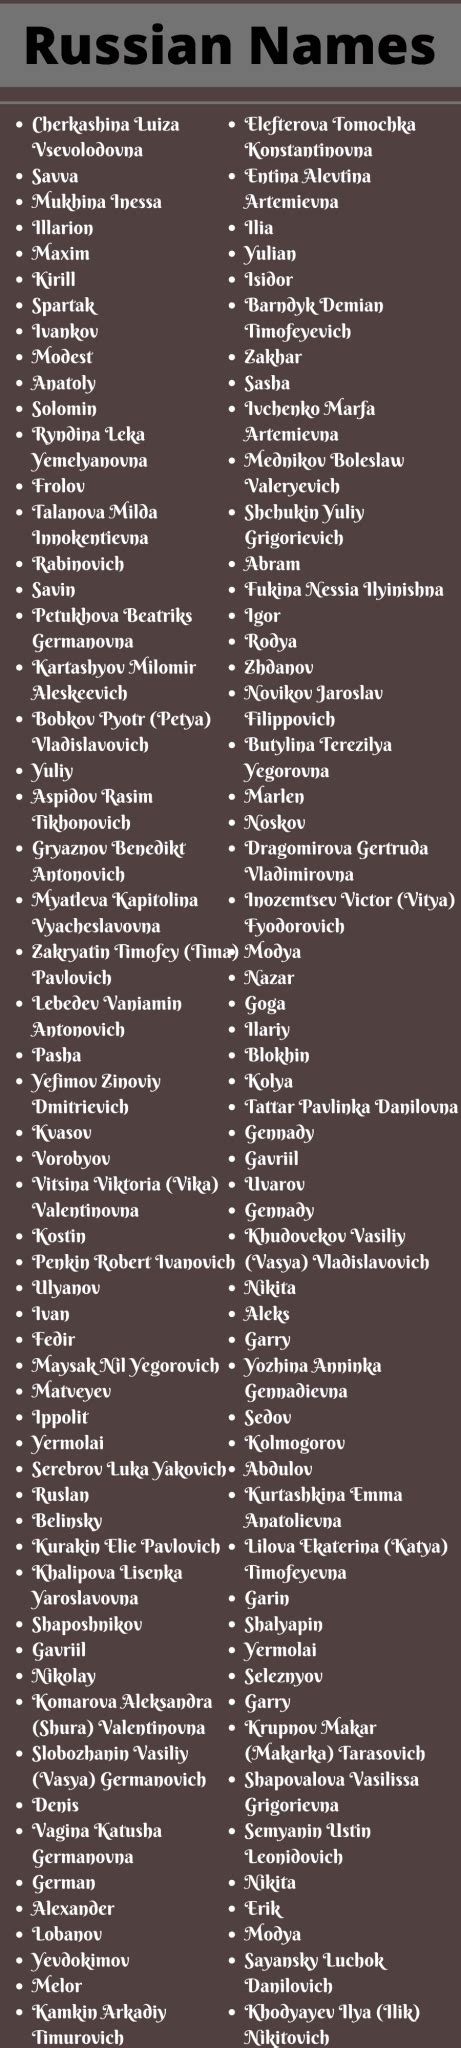 russian names 400 cool and amazing russian names